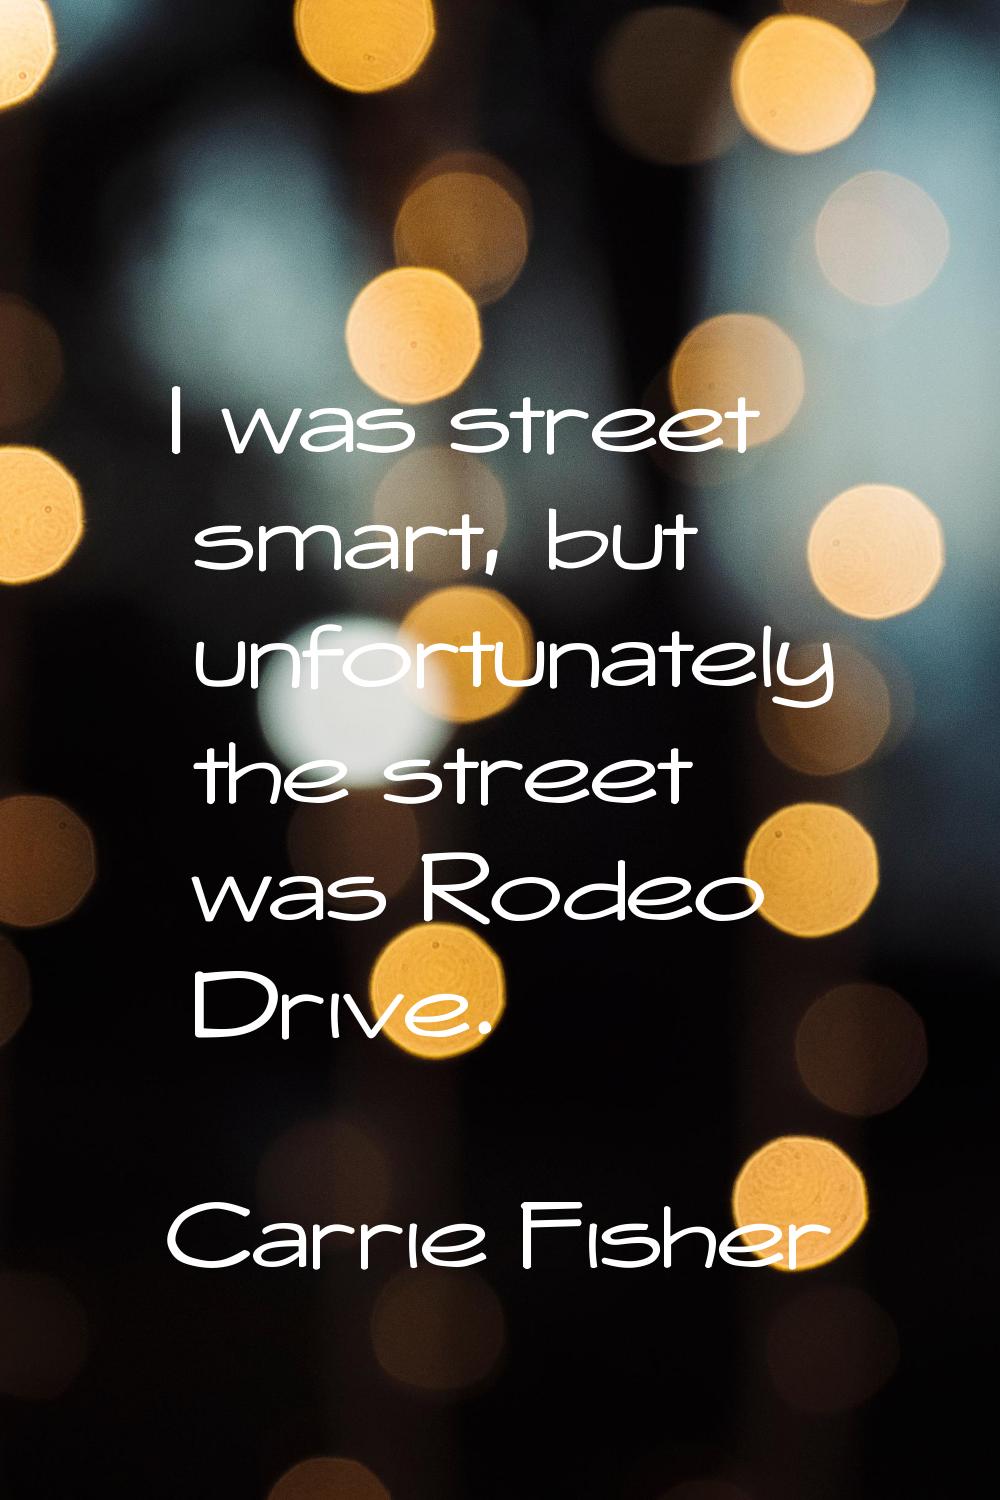 I was street smart, but unfortunately the street was Rodeo Drive.